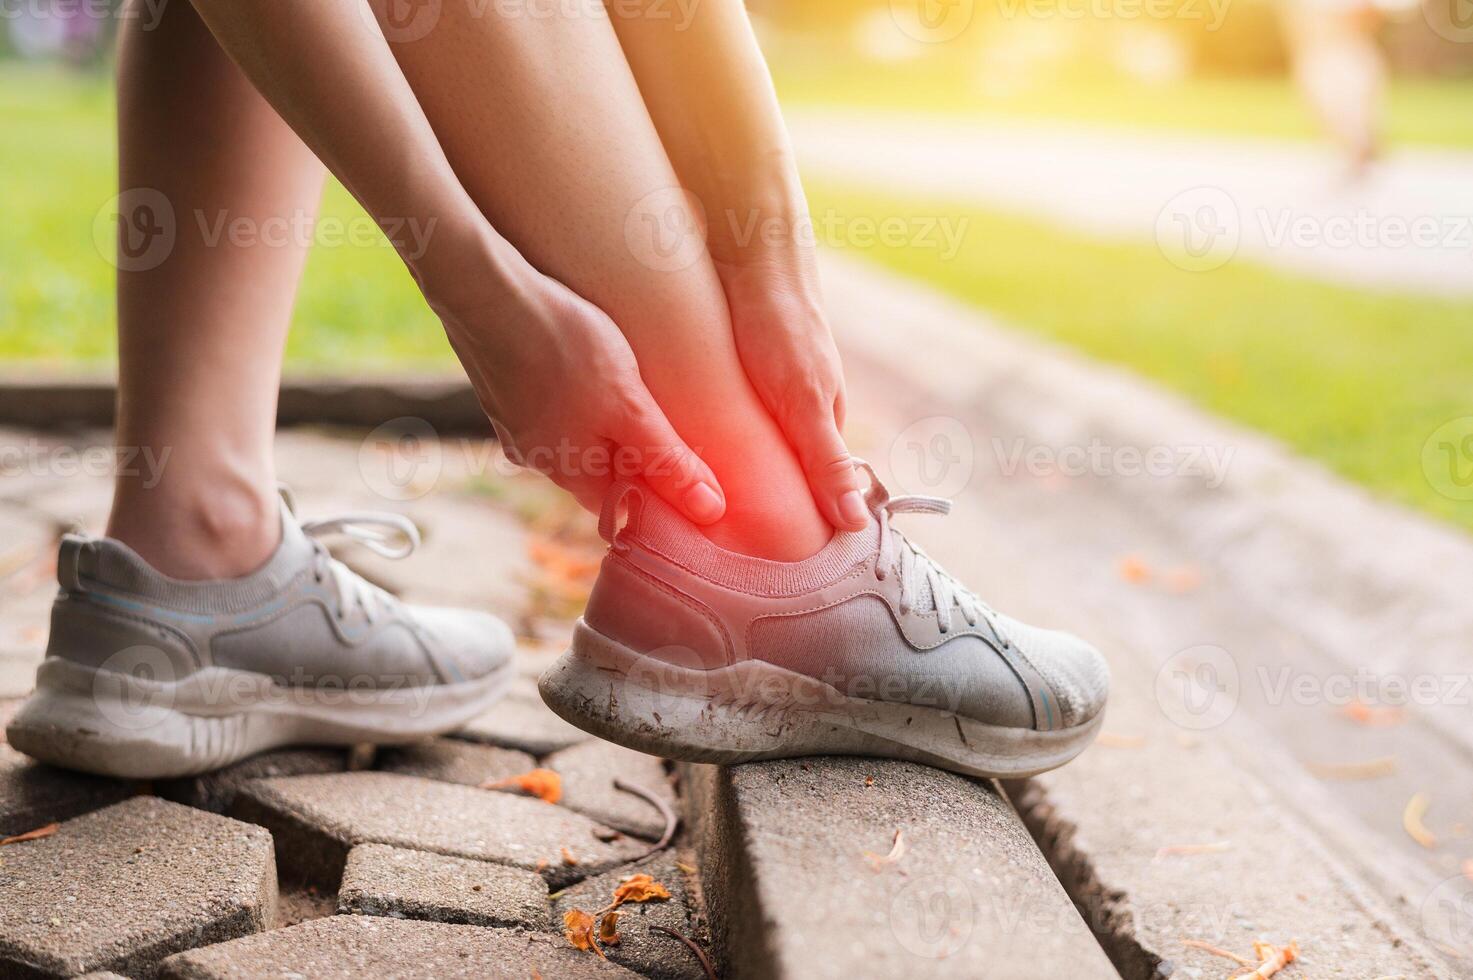 female joggers, pain and discomfort after running in the public park. care and treatment for ankle injuries concept. photo